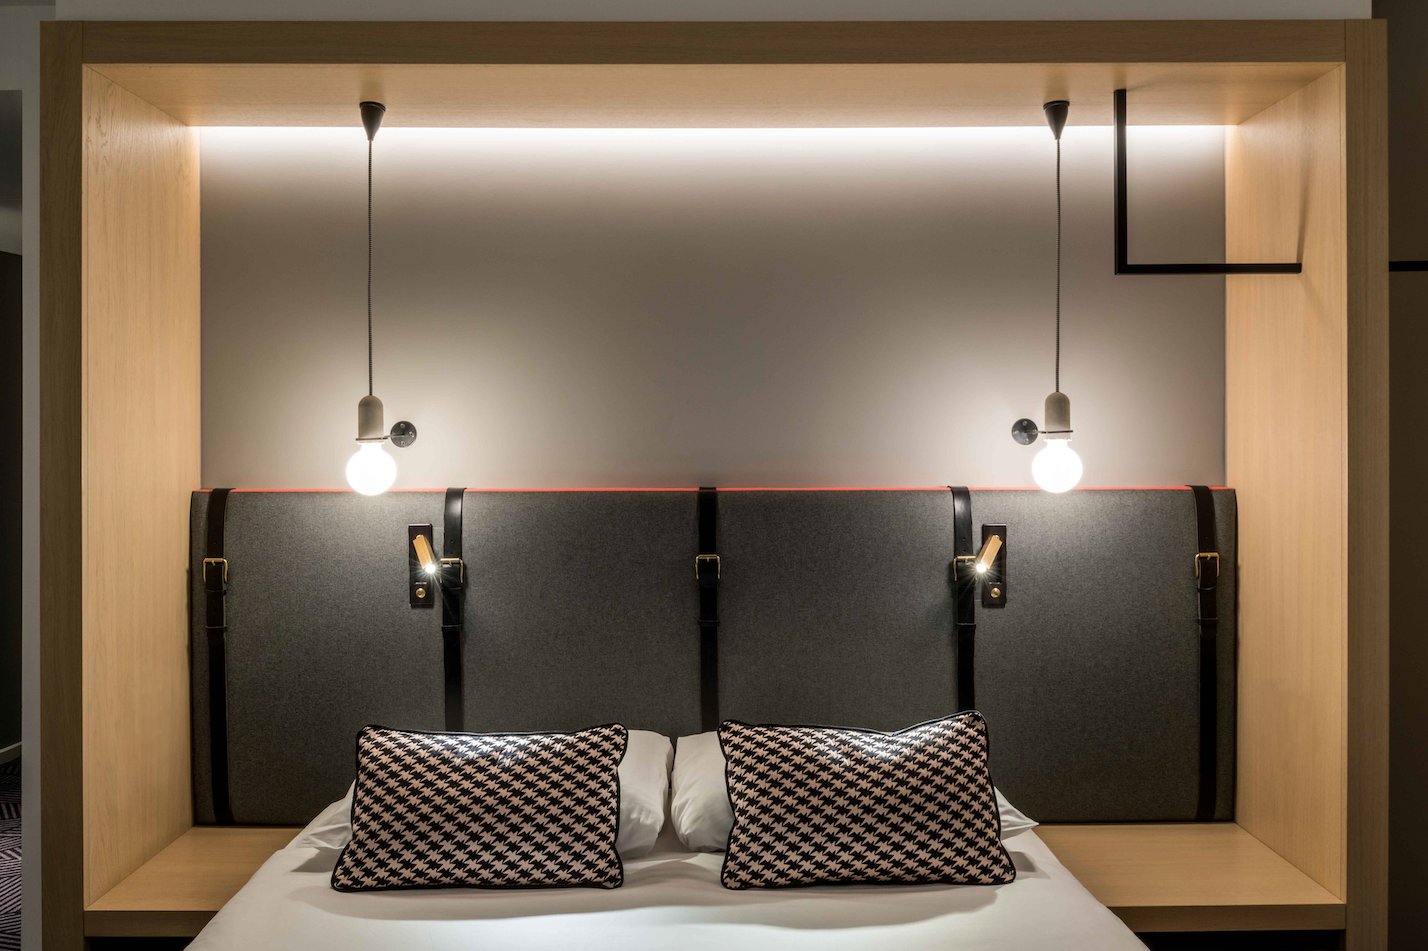 CITY BREAKS: Urban Excursions with Assembly Hotel London